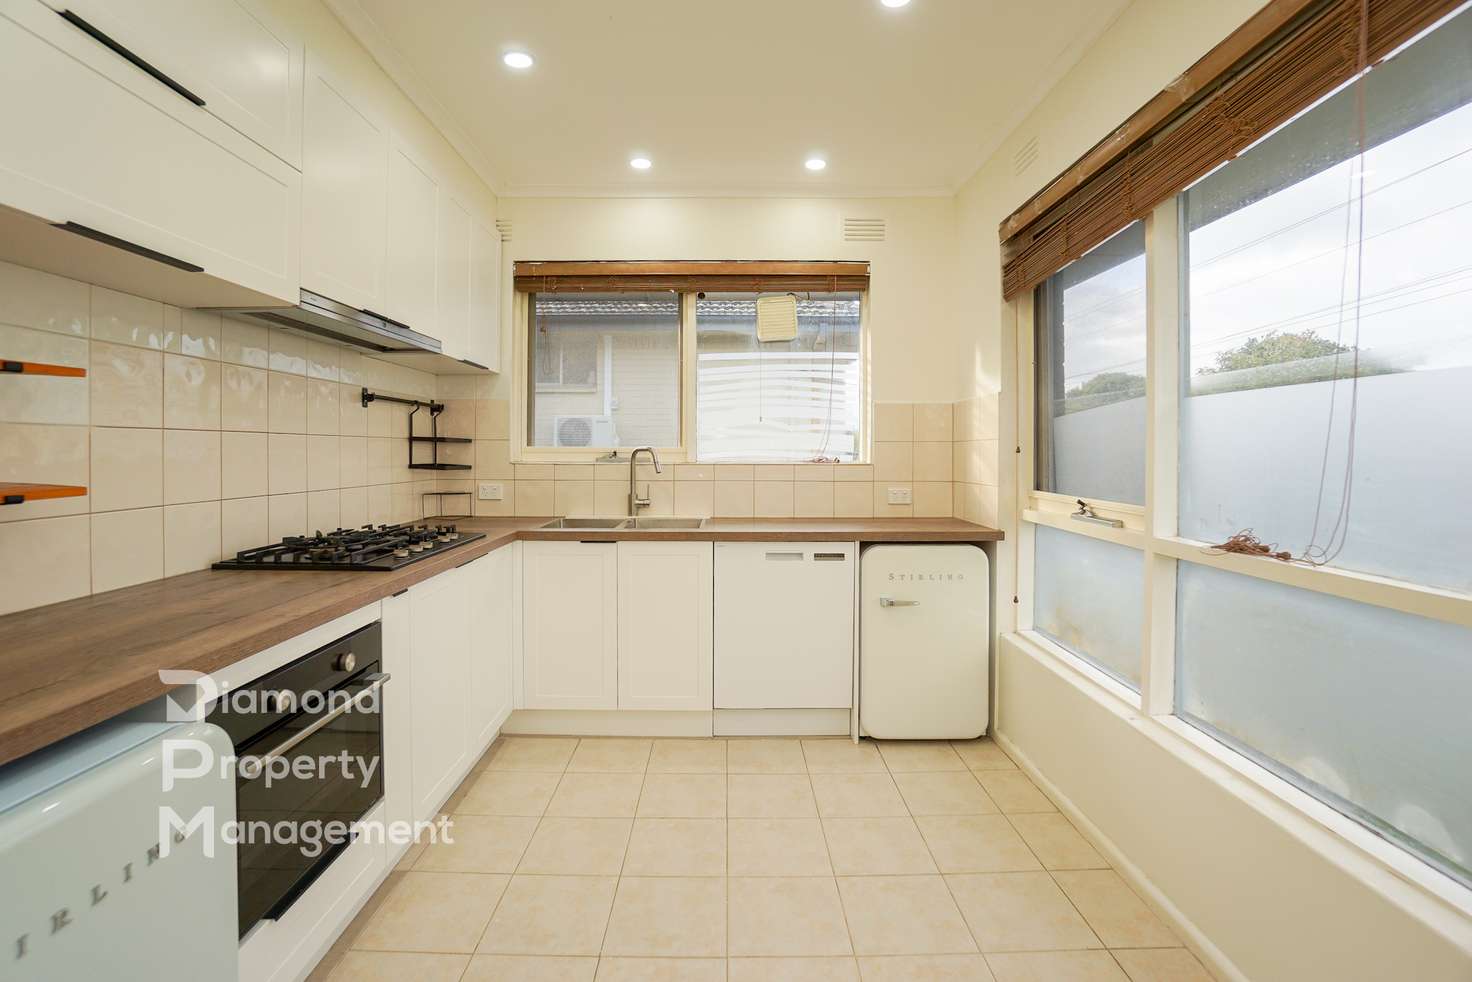 Main view of Homely apartment listing, 5/217 Grange Road, Glen Huntly VIC 3163